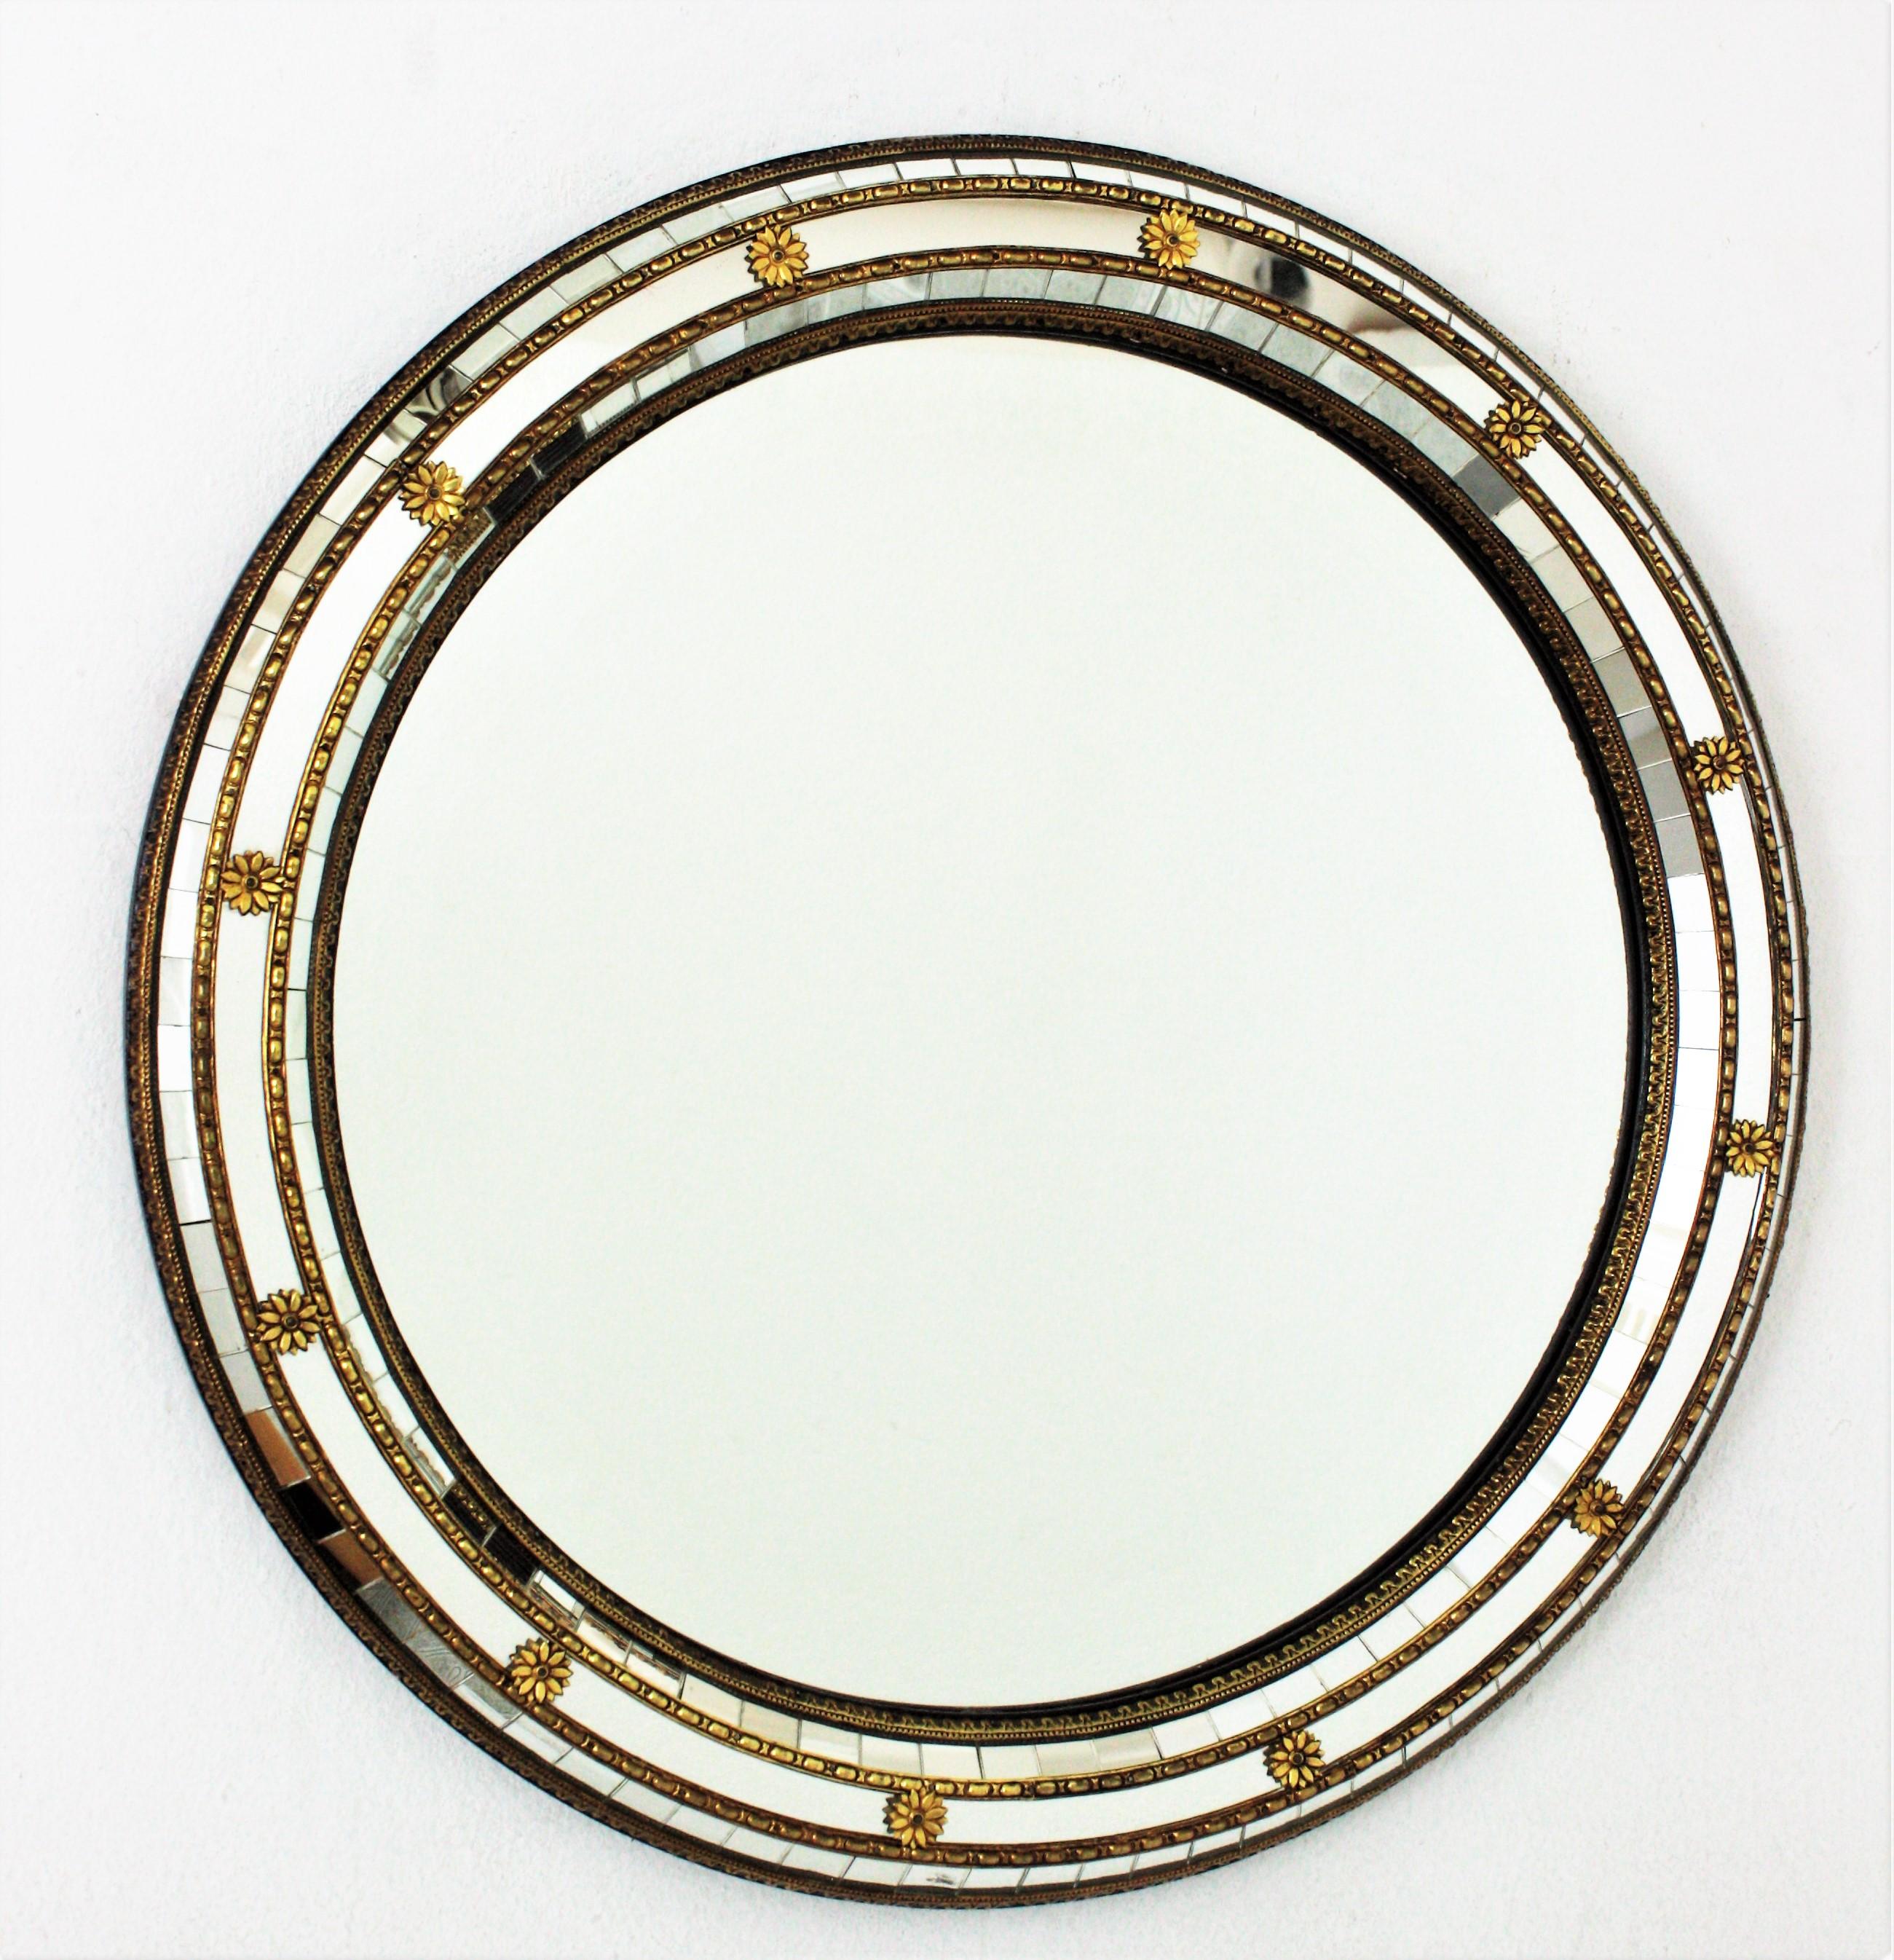 Venetian style round wall mirror with brass accents, Spain, 1950-1960s.
This circular mirror has a triple mirror frame. The mirrored panels are adorned by metal patterns and flowers.
This wall mirror will be perfect in a contemporary or classical